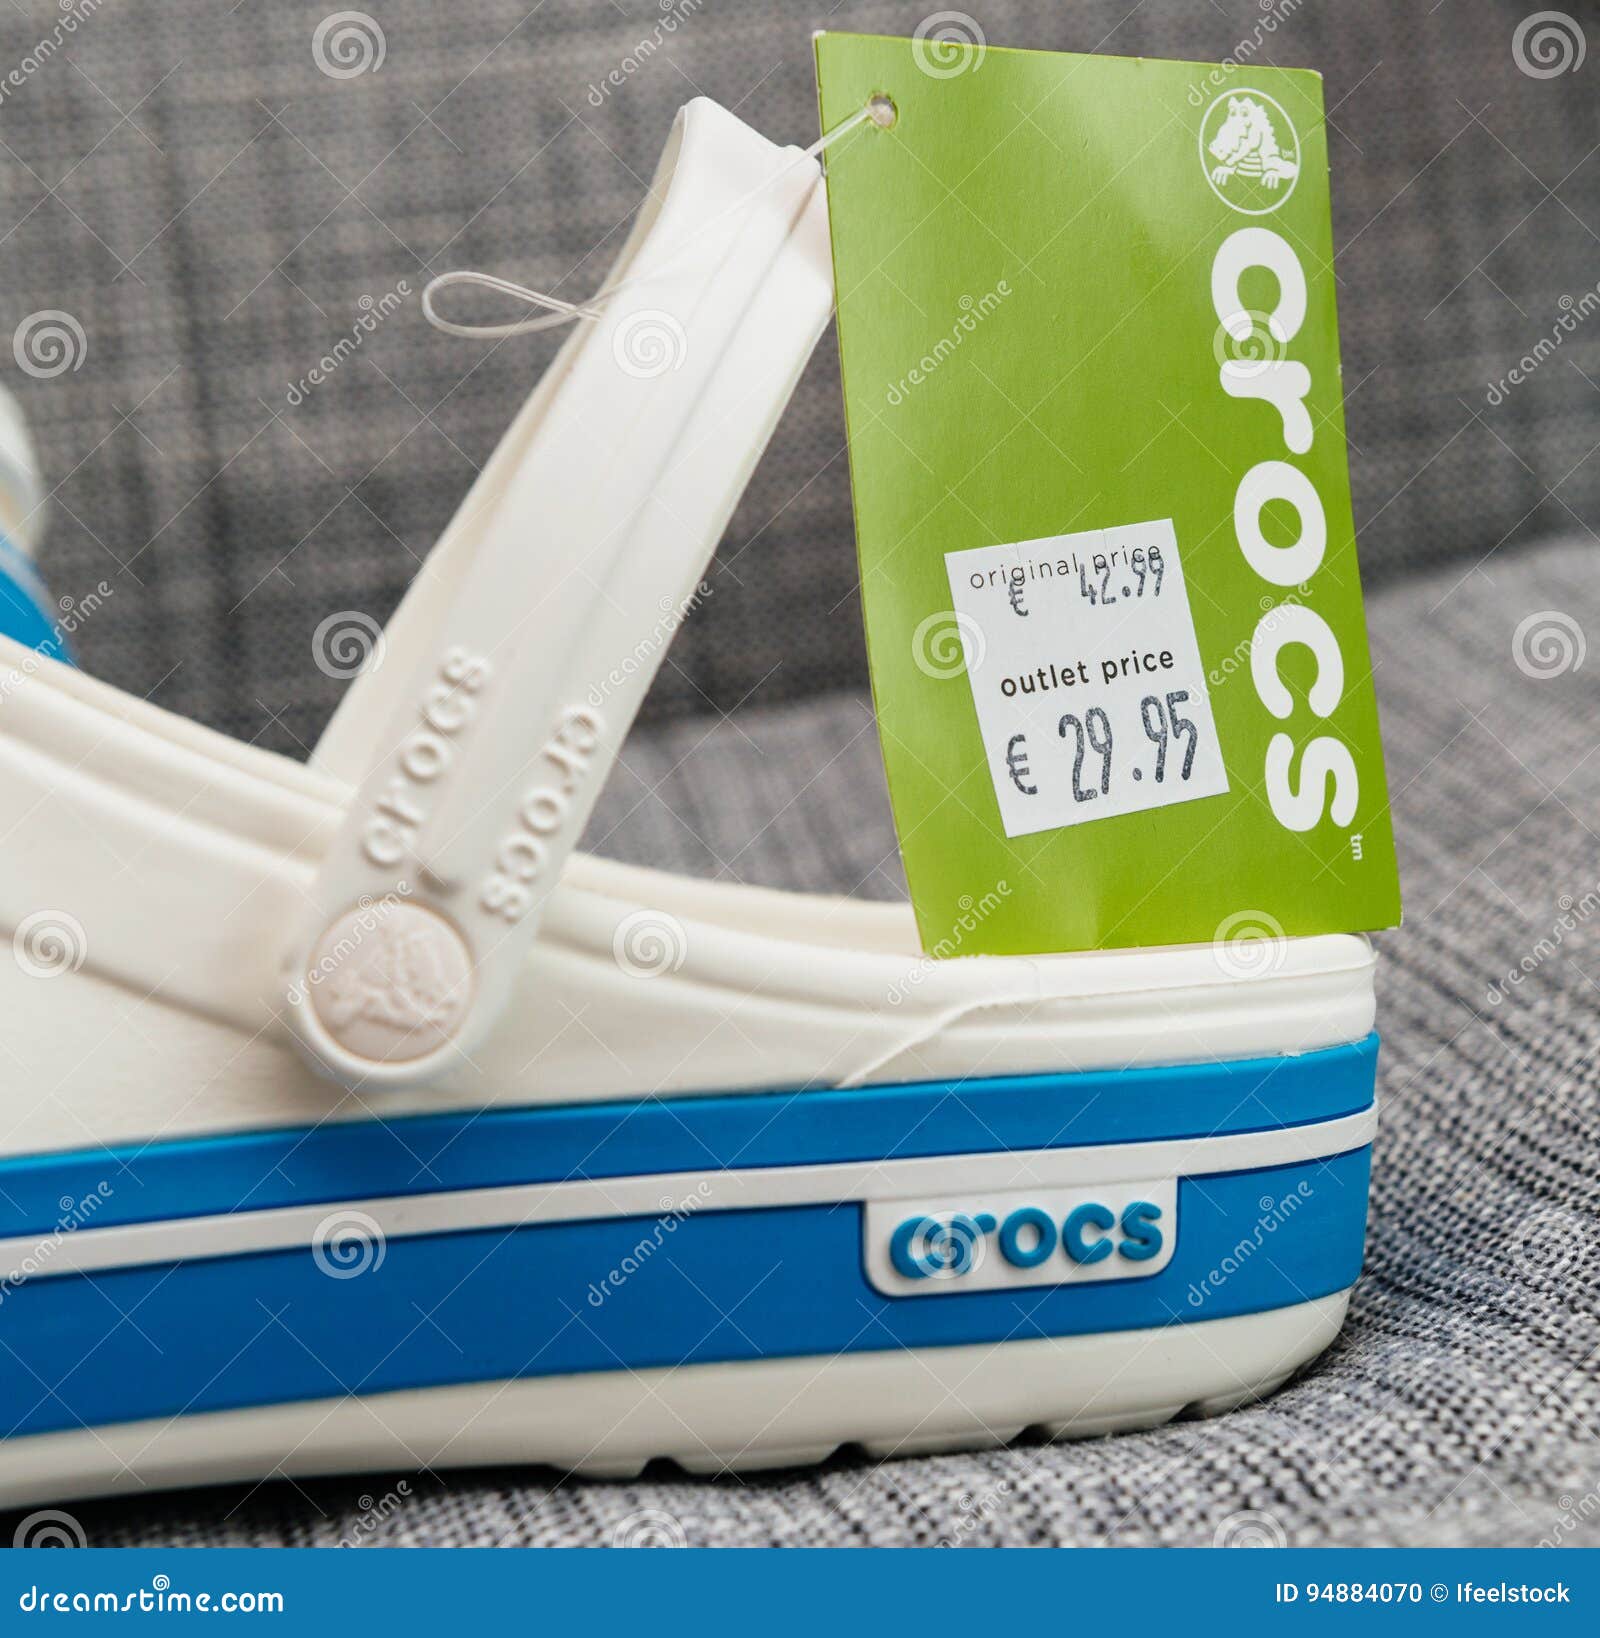 Crocs Clogs Shoes with Regular and Outlet Price Editorial Image - Image of  customer, price: 94884070